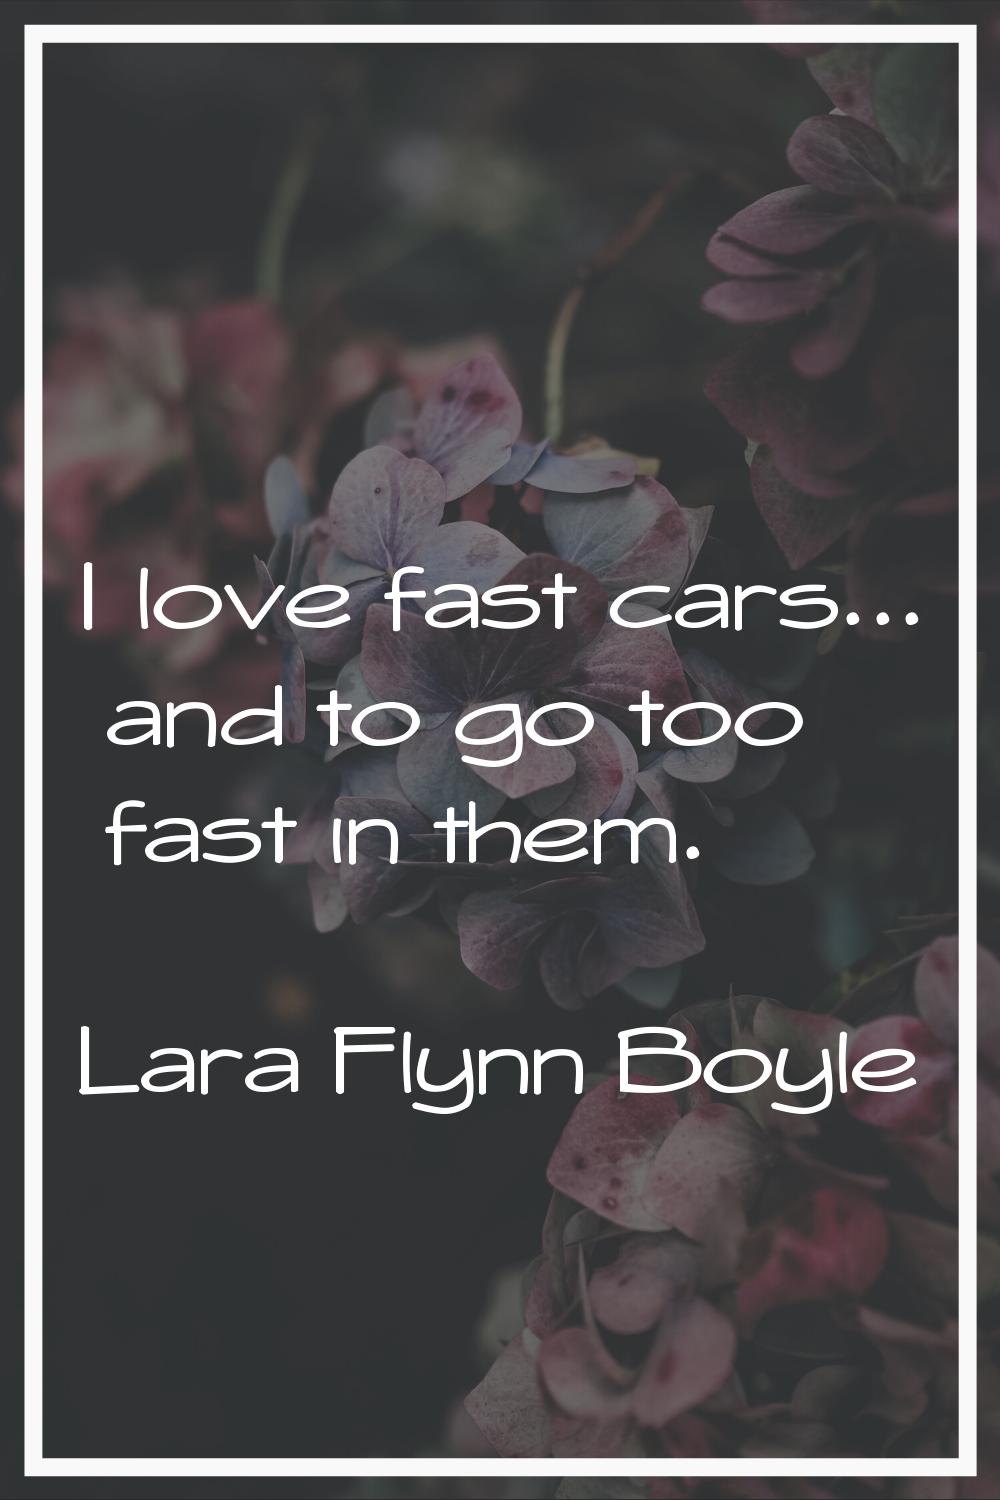 I love fast cars... and to go too fast in them.